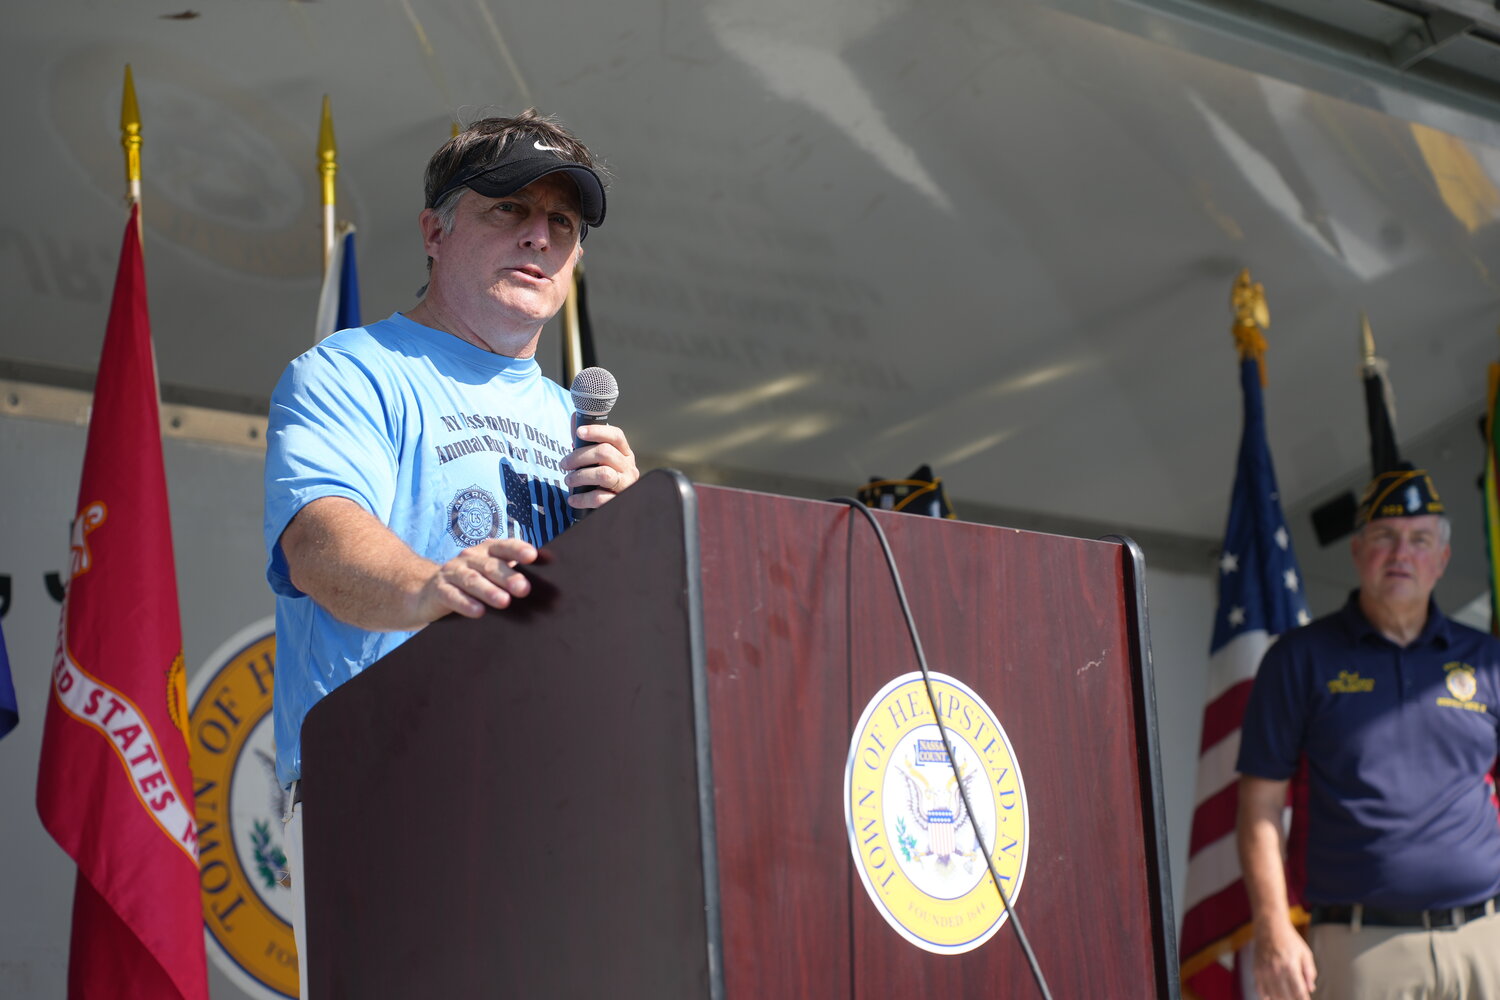 Assemblyman Brian Curran, who spearheaded the 5k ‘Run for Heroes’ in 2011 to help raise money for local veterans organizations shared a few words on Saturday morning.